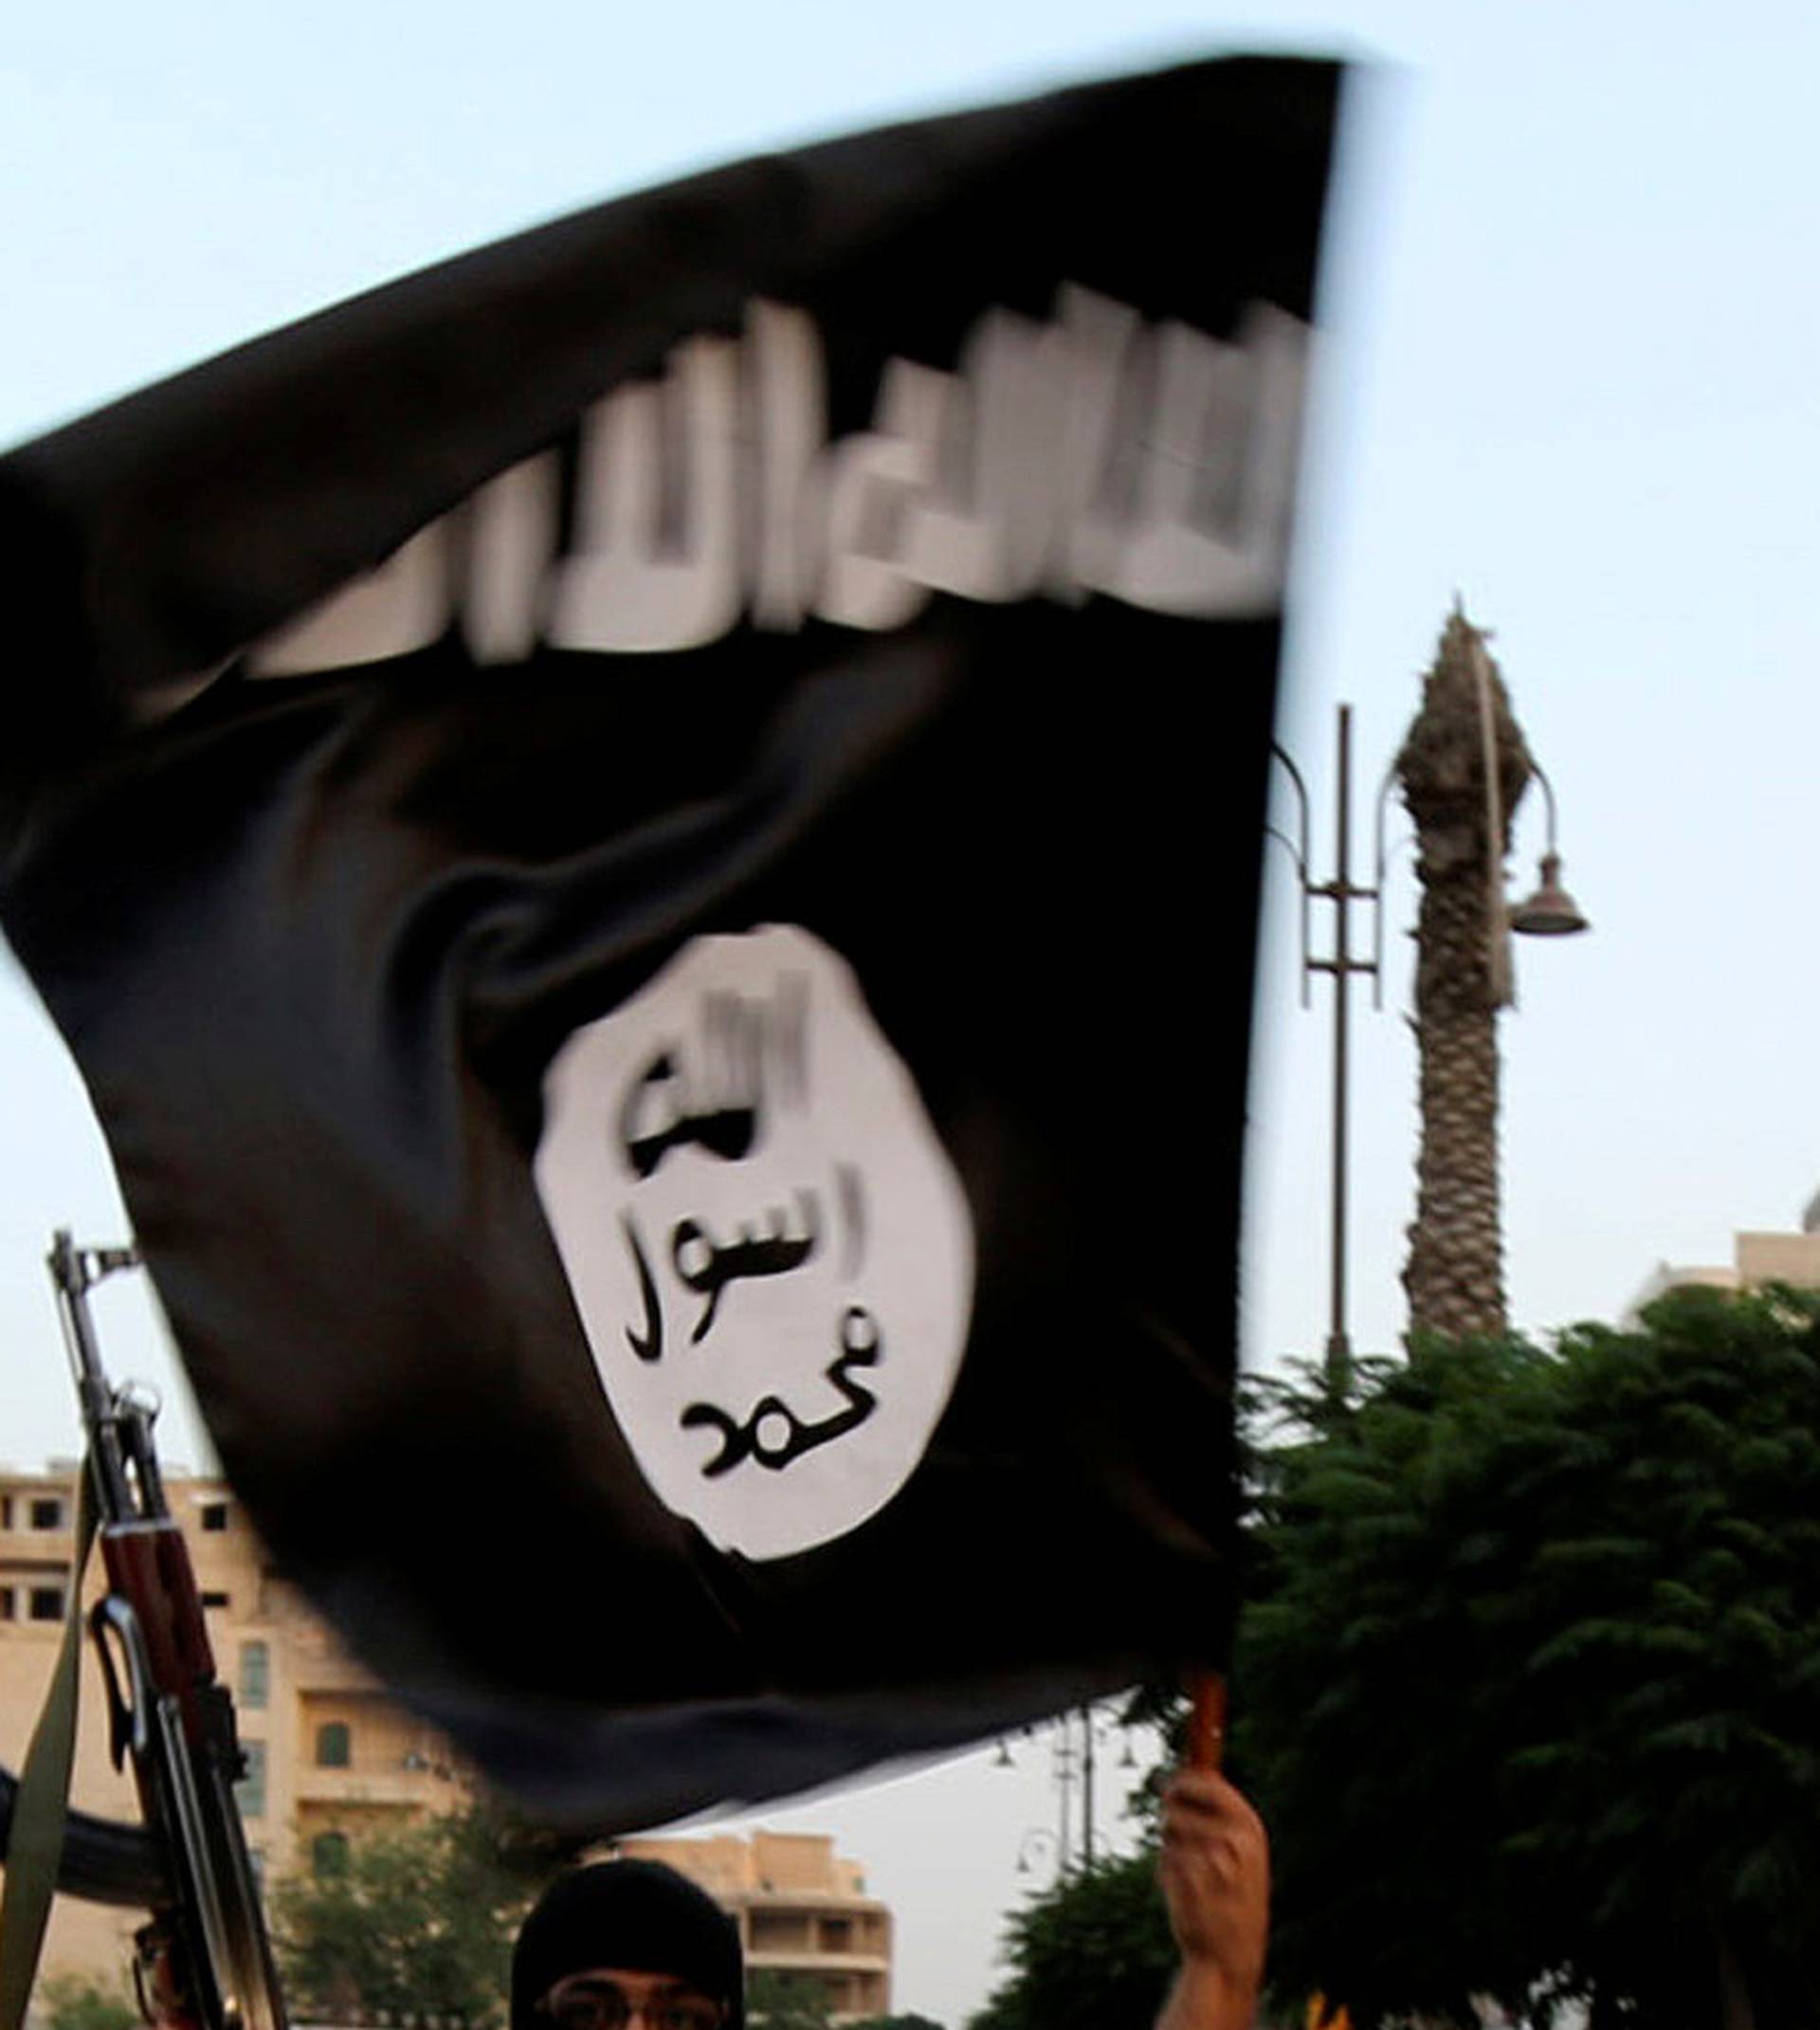 FILE PHOTO: A member loyal to the ISIL waves an ISIL flag in Raqqa